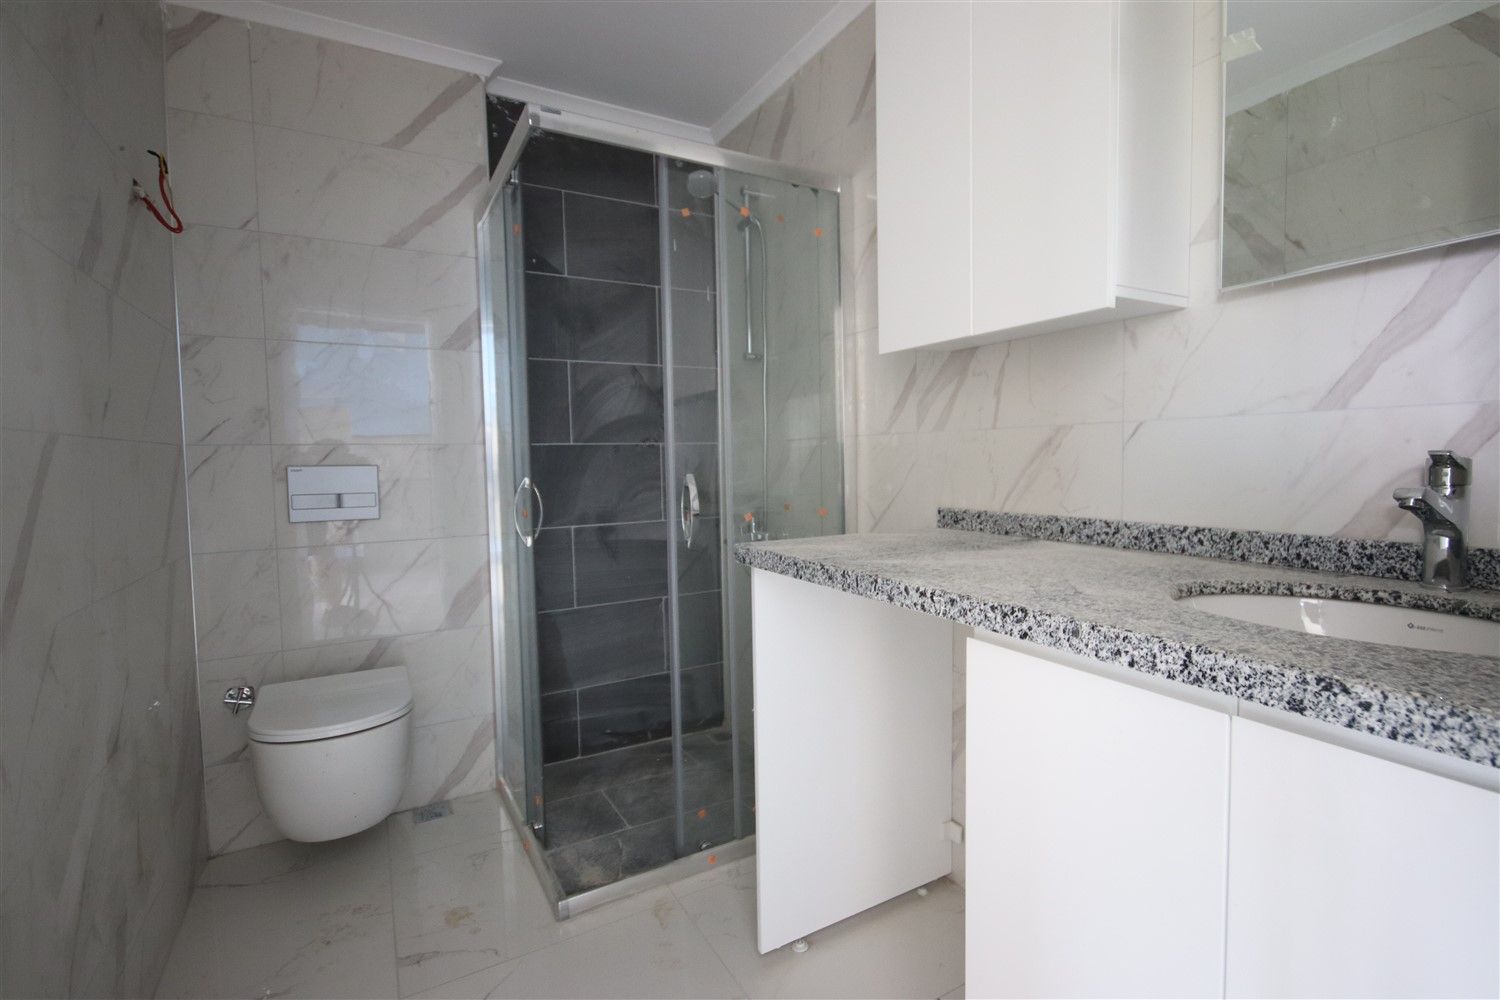 Apartment in project under construction in Avsallar district, Alanya